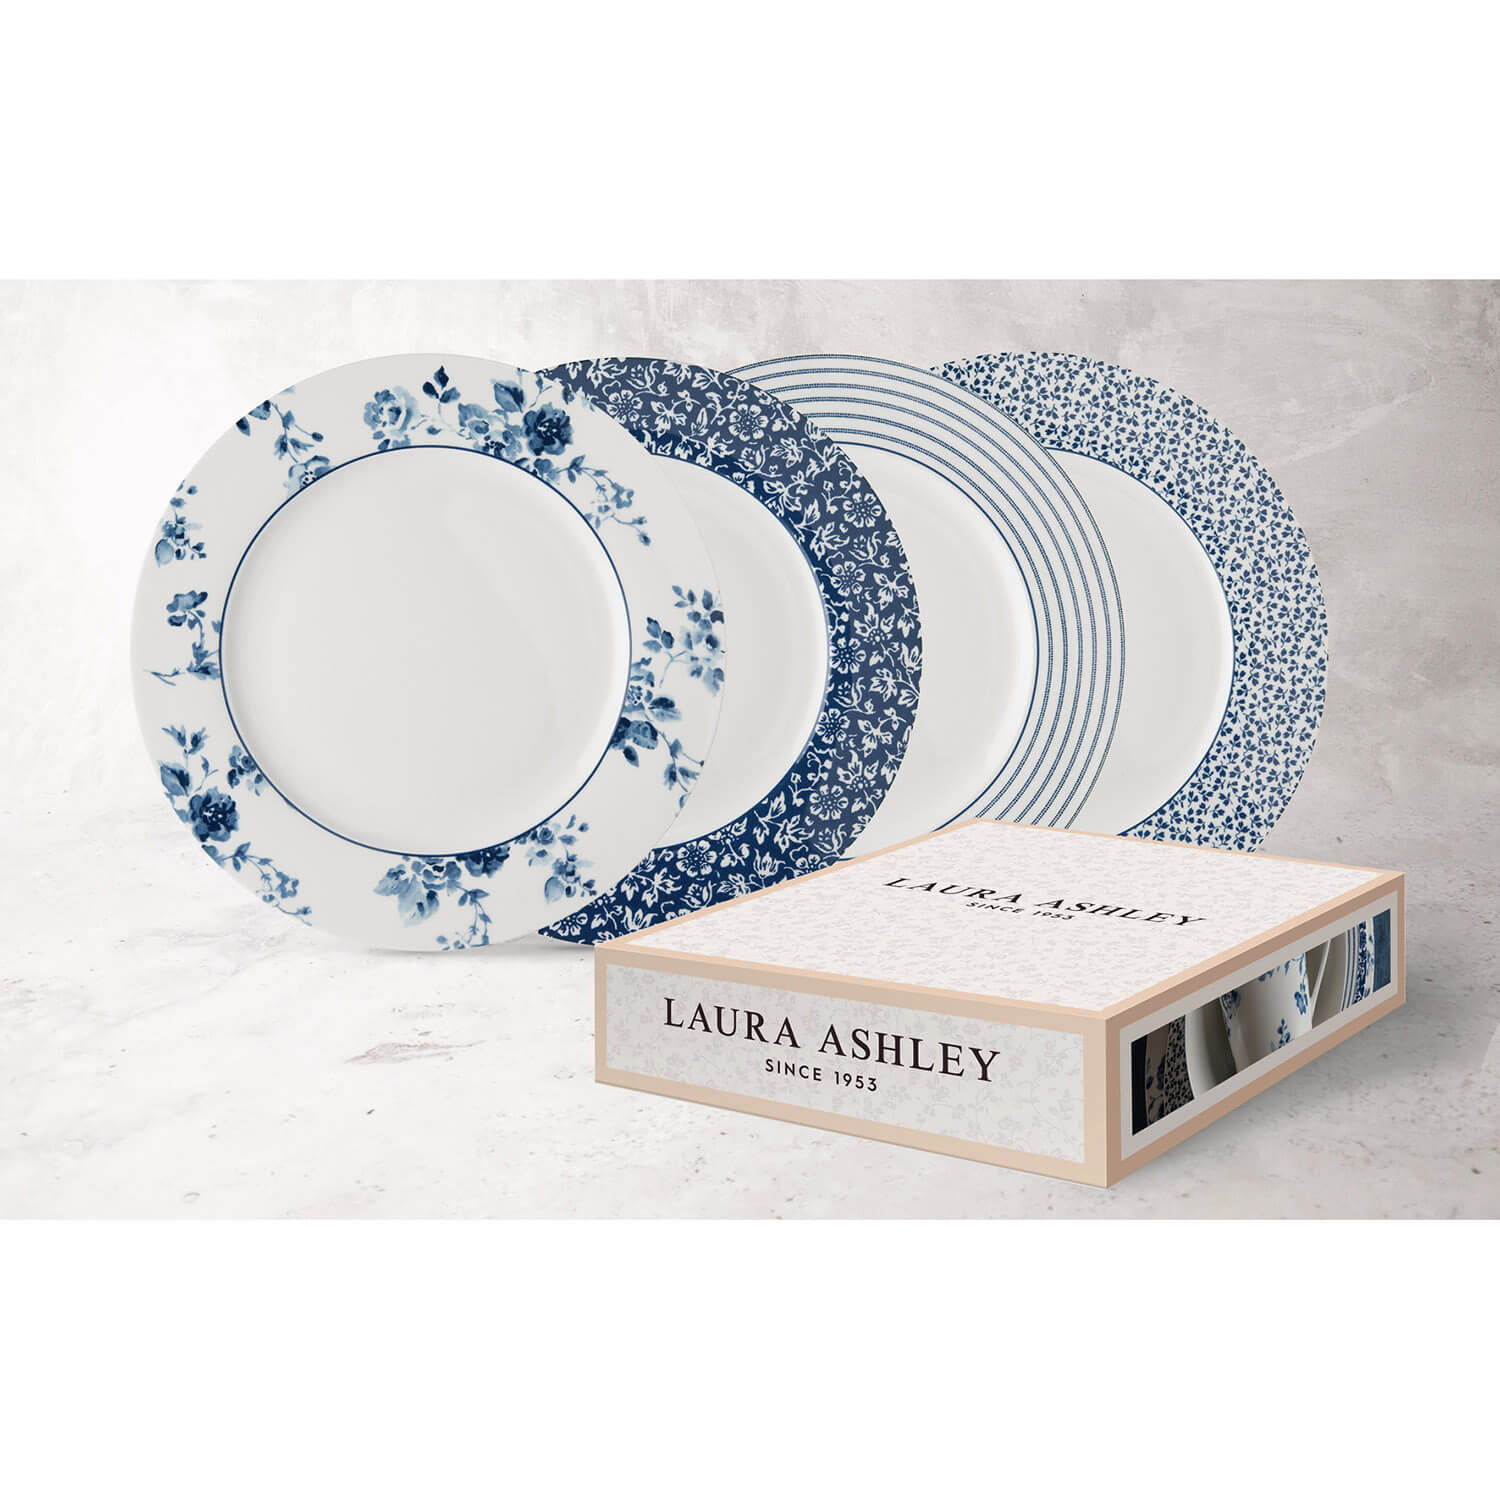 Laura Ashley Blueprint Collectables Set of 4 Plates 4 Shaws Department Stores